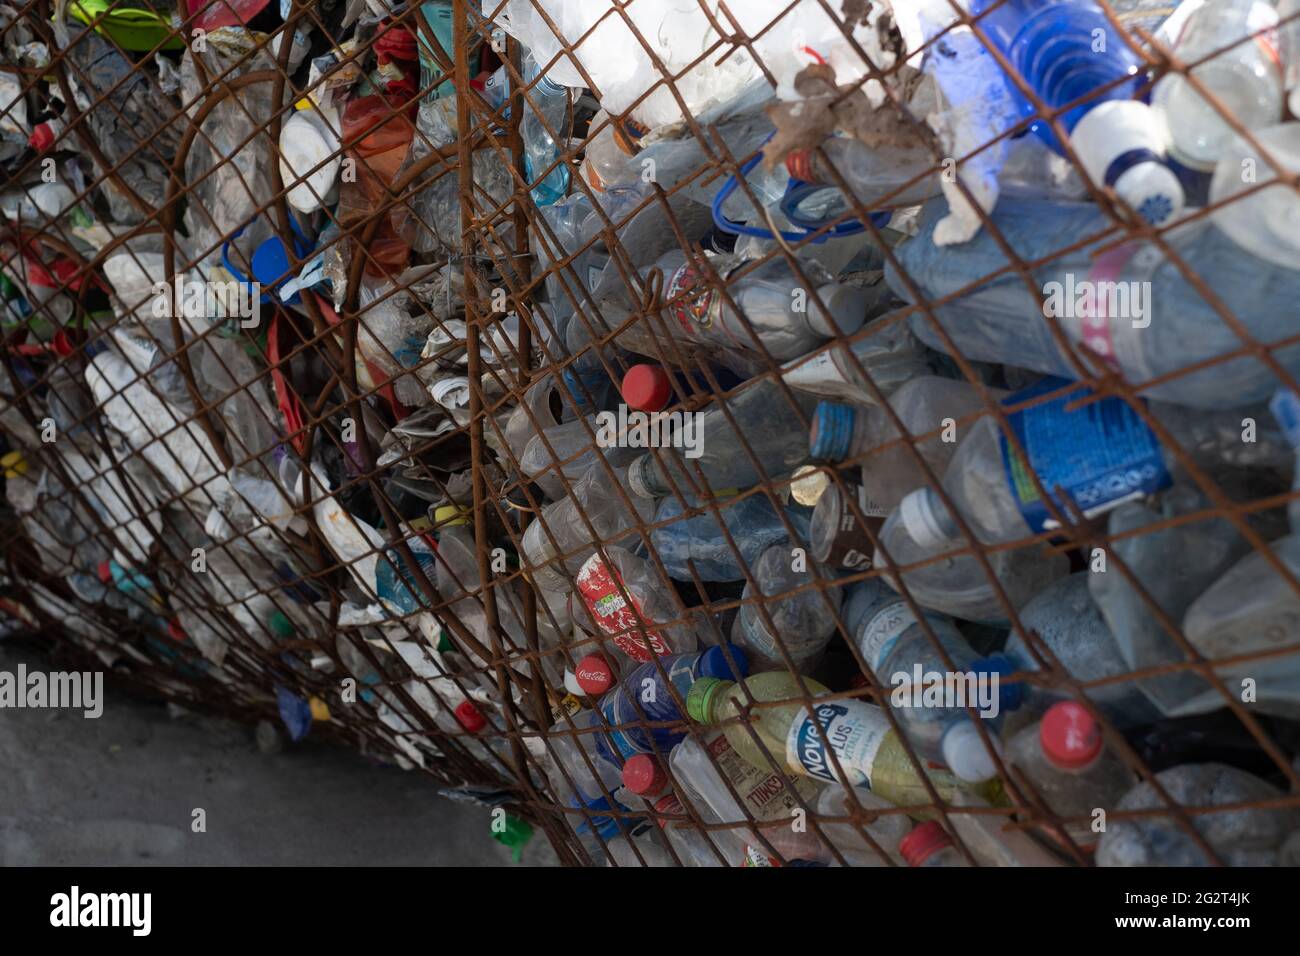 Garbage bin for used plastic bottles and other waste. Stock Photo